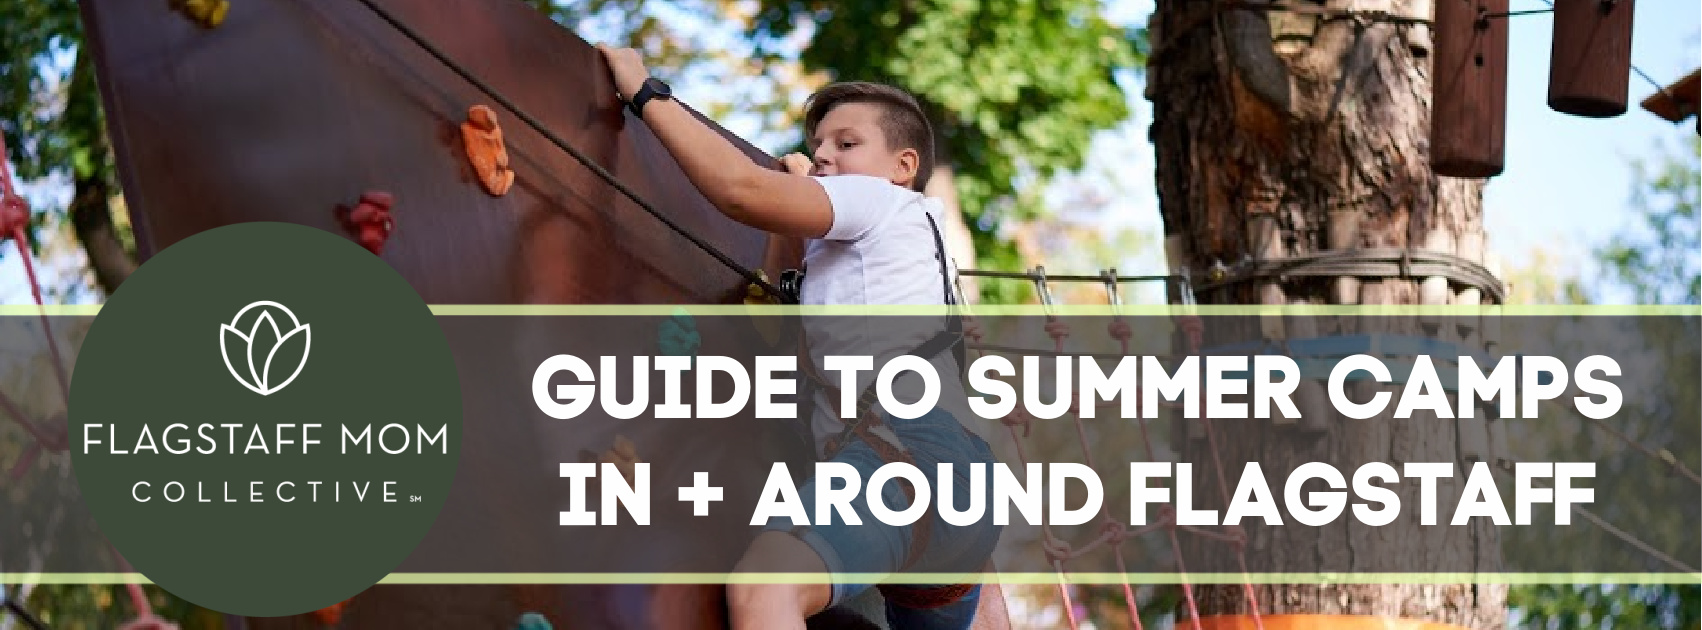 21 Guide To Summer Camps In Around Flagstaff